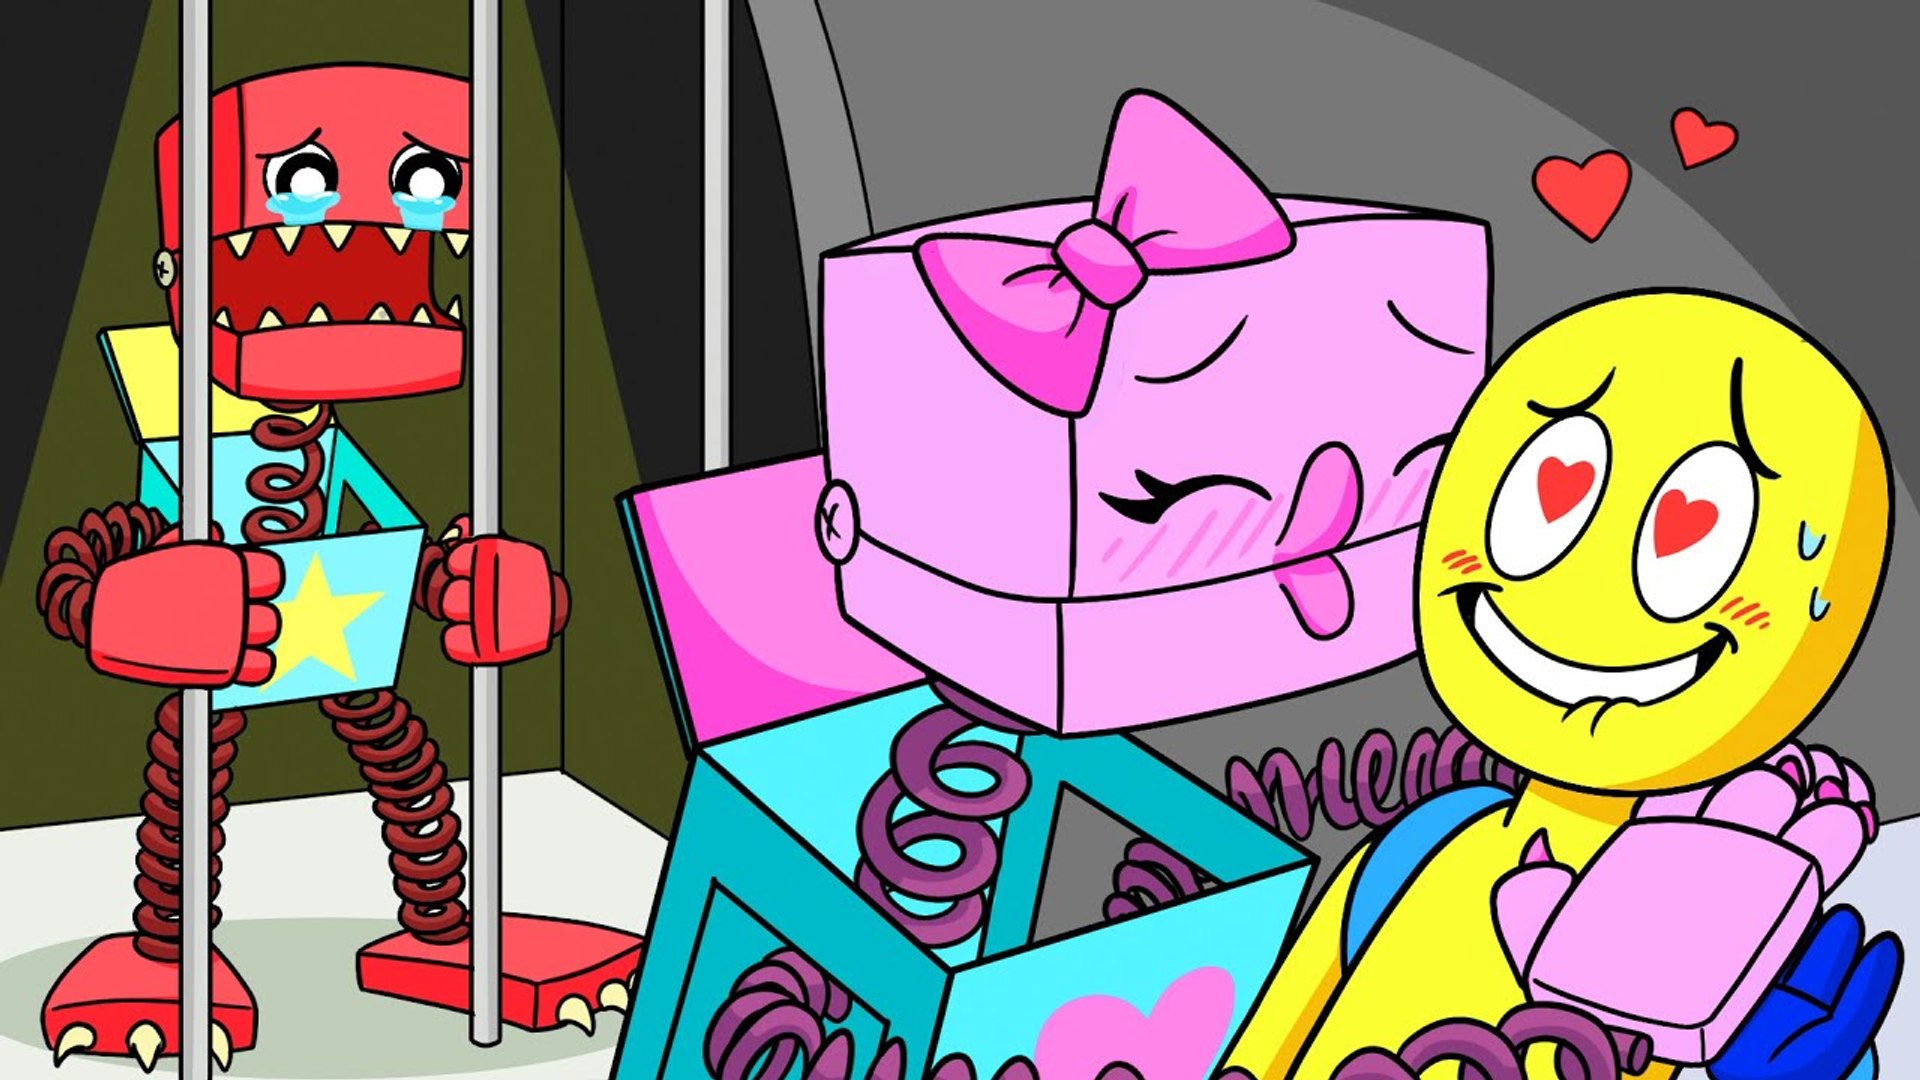 The SAD Story of BOXY BOO - Poppy Playtime Project Animation 